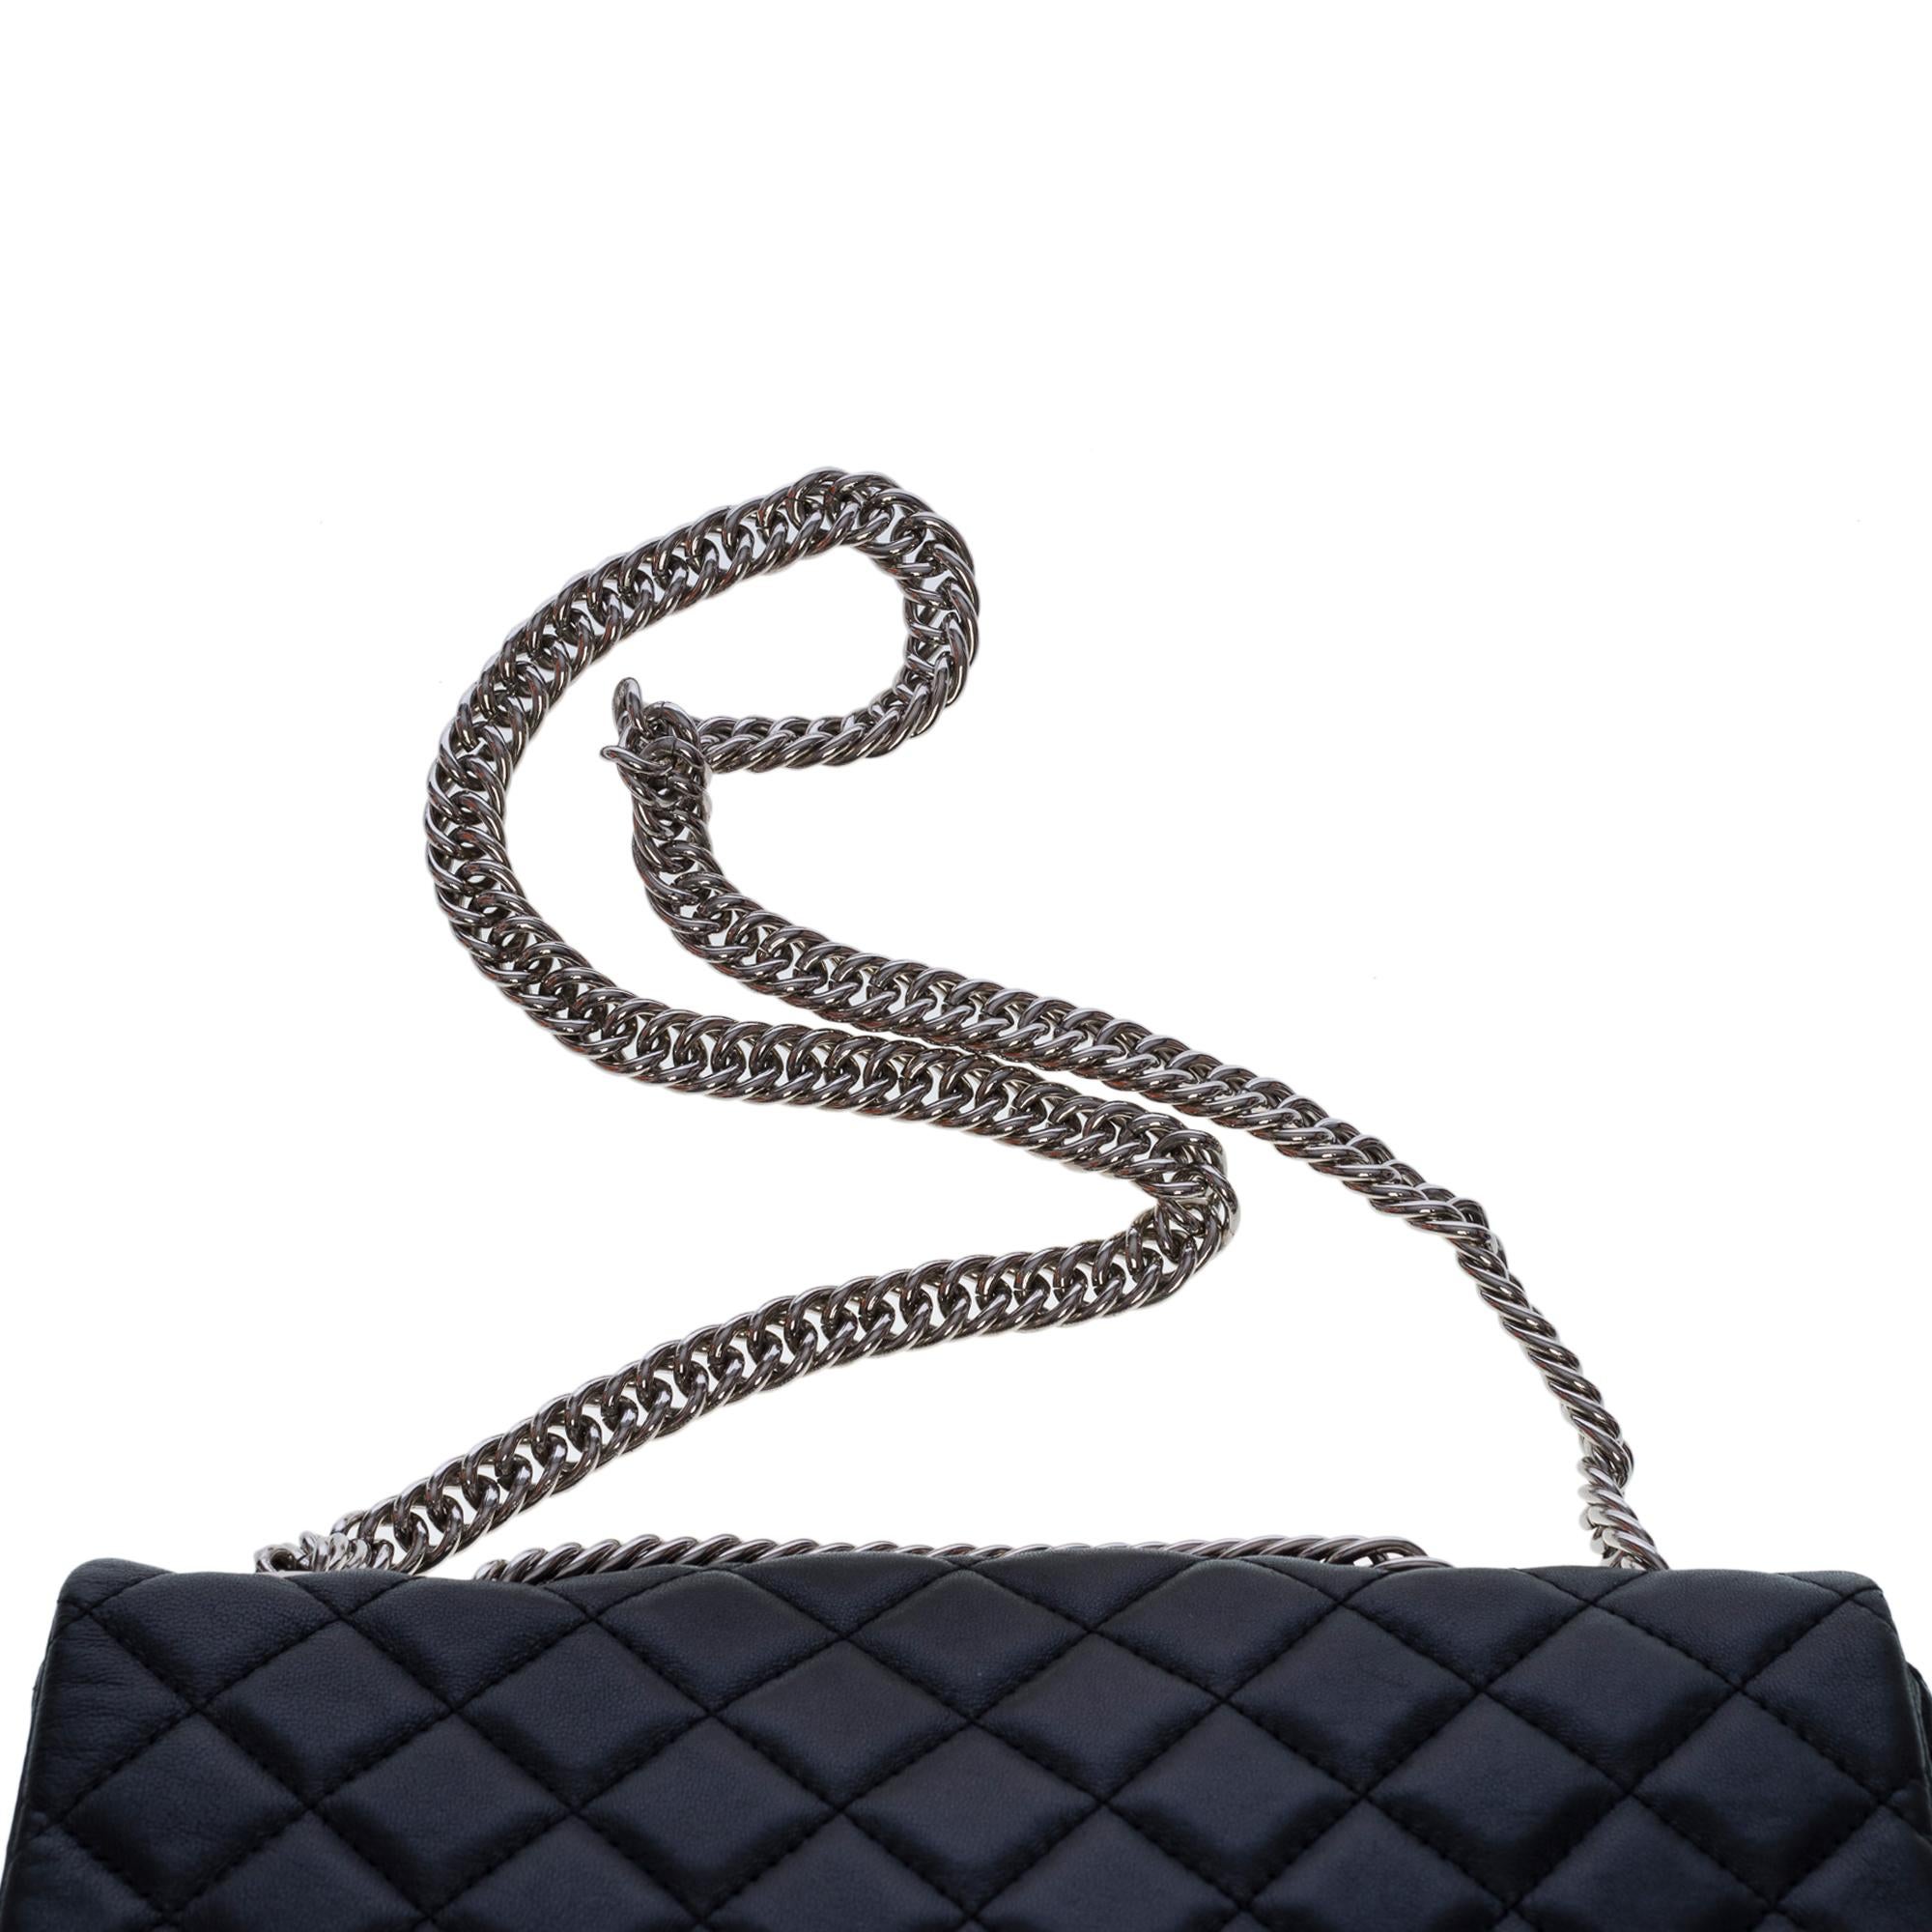 Chanel Timeless/Classic Jumbo single flap shoulder bag in black leather, SHW 5